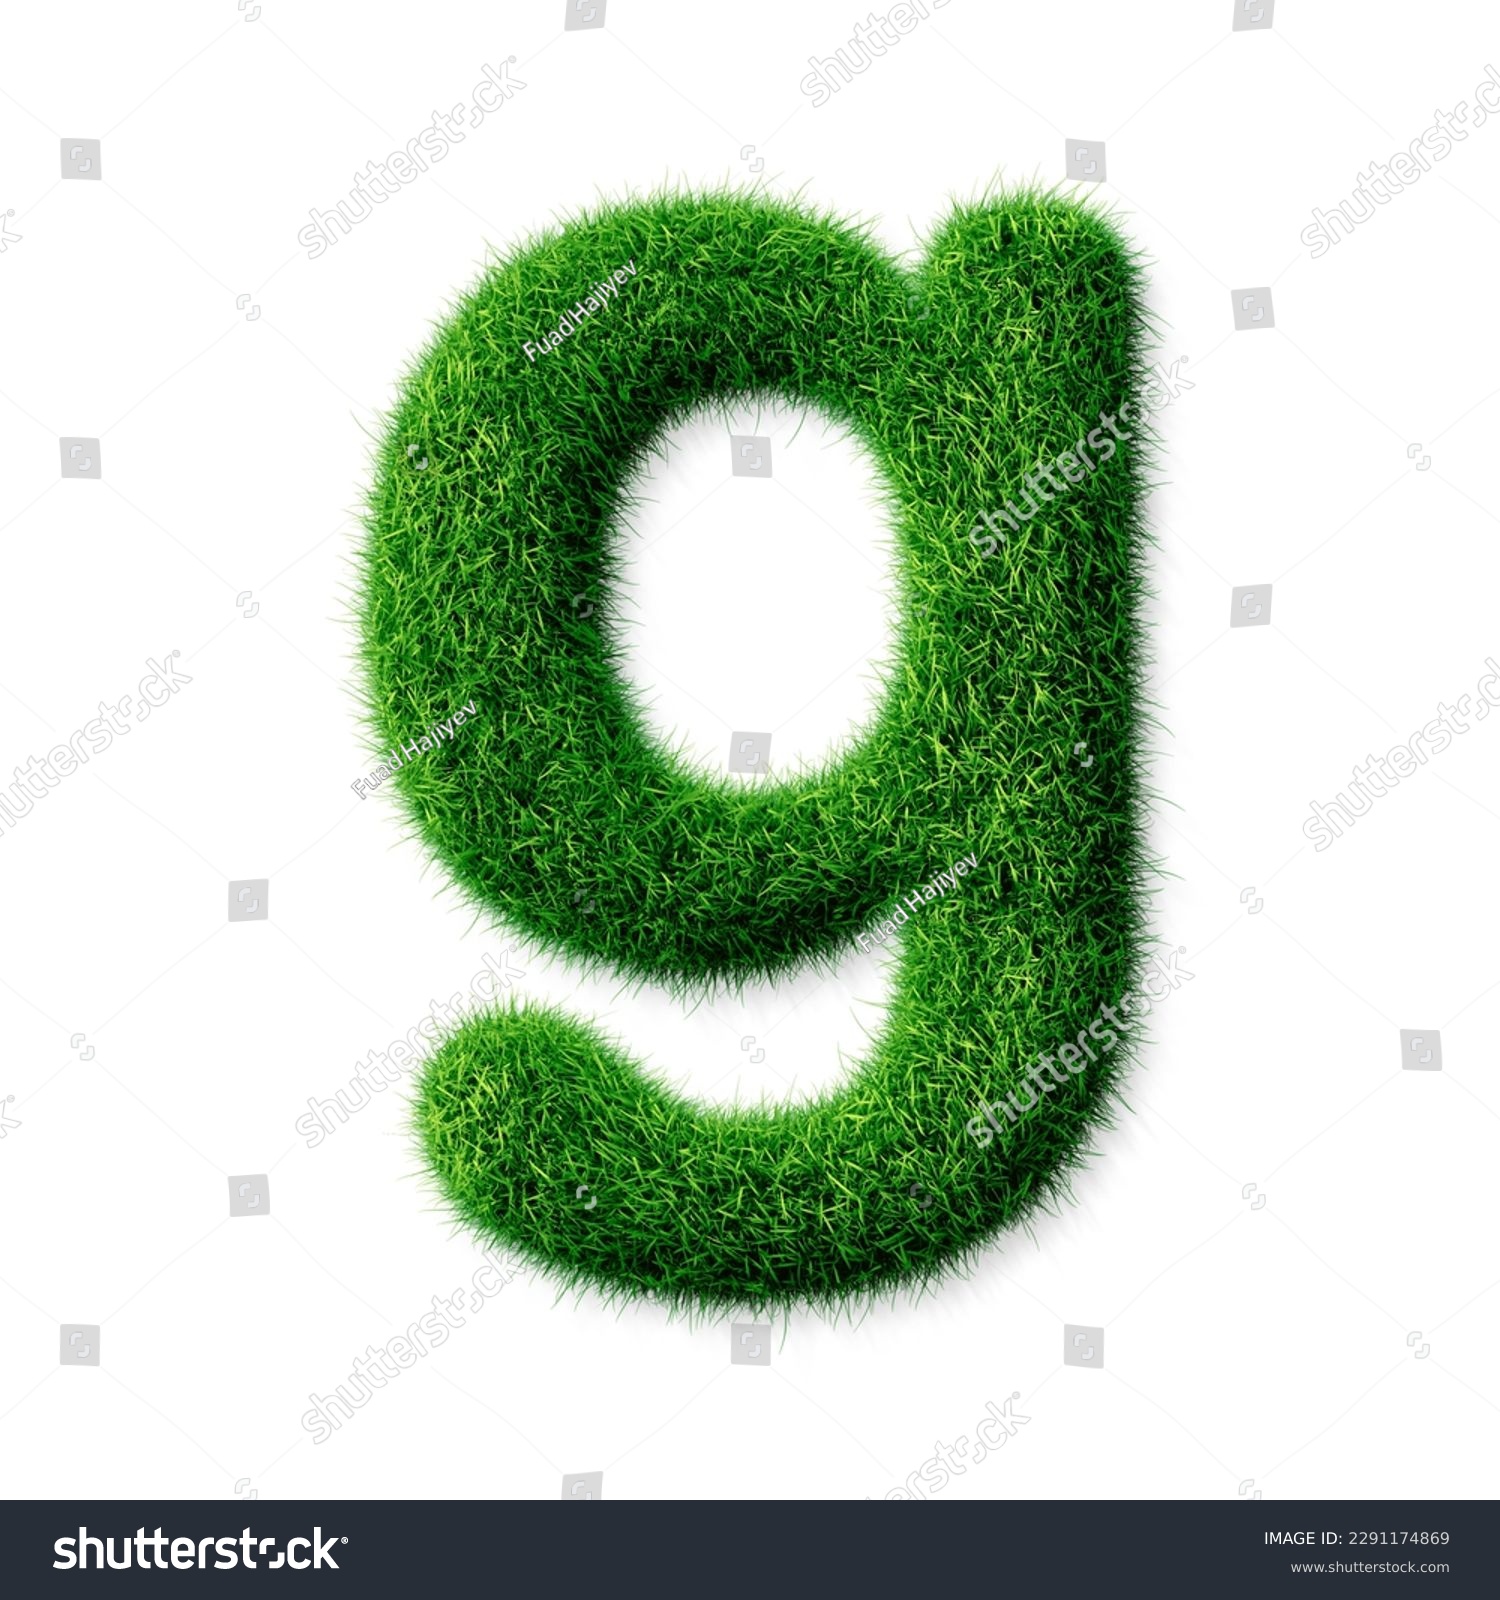 A letter g with grass on a white background, eco text effect, isolated letter with grass effect high quality #2291174869